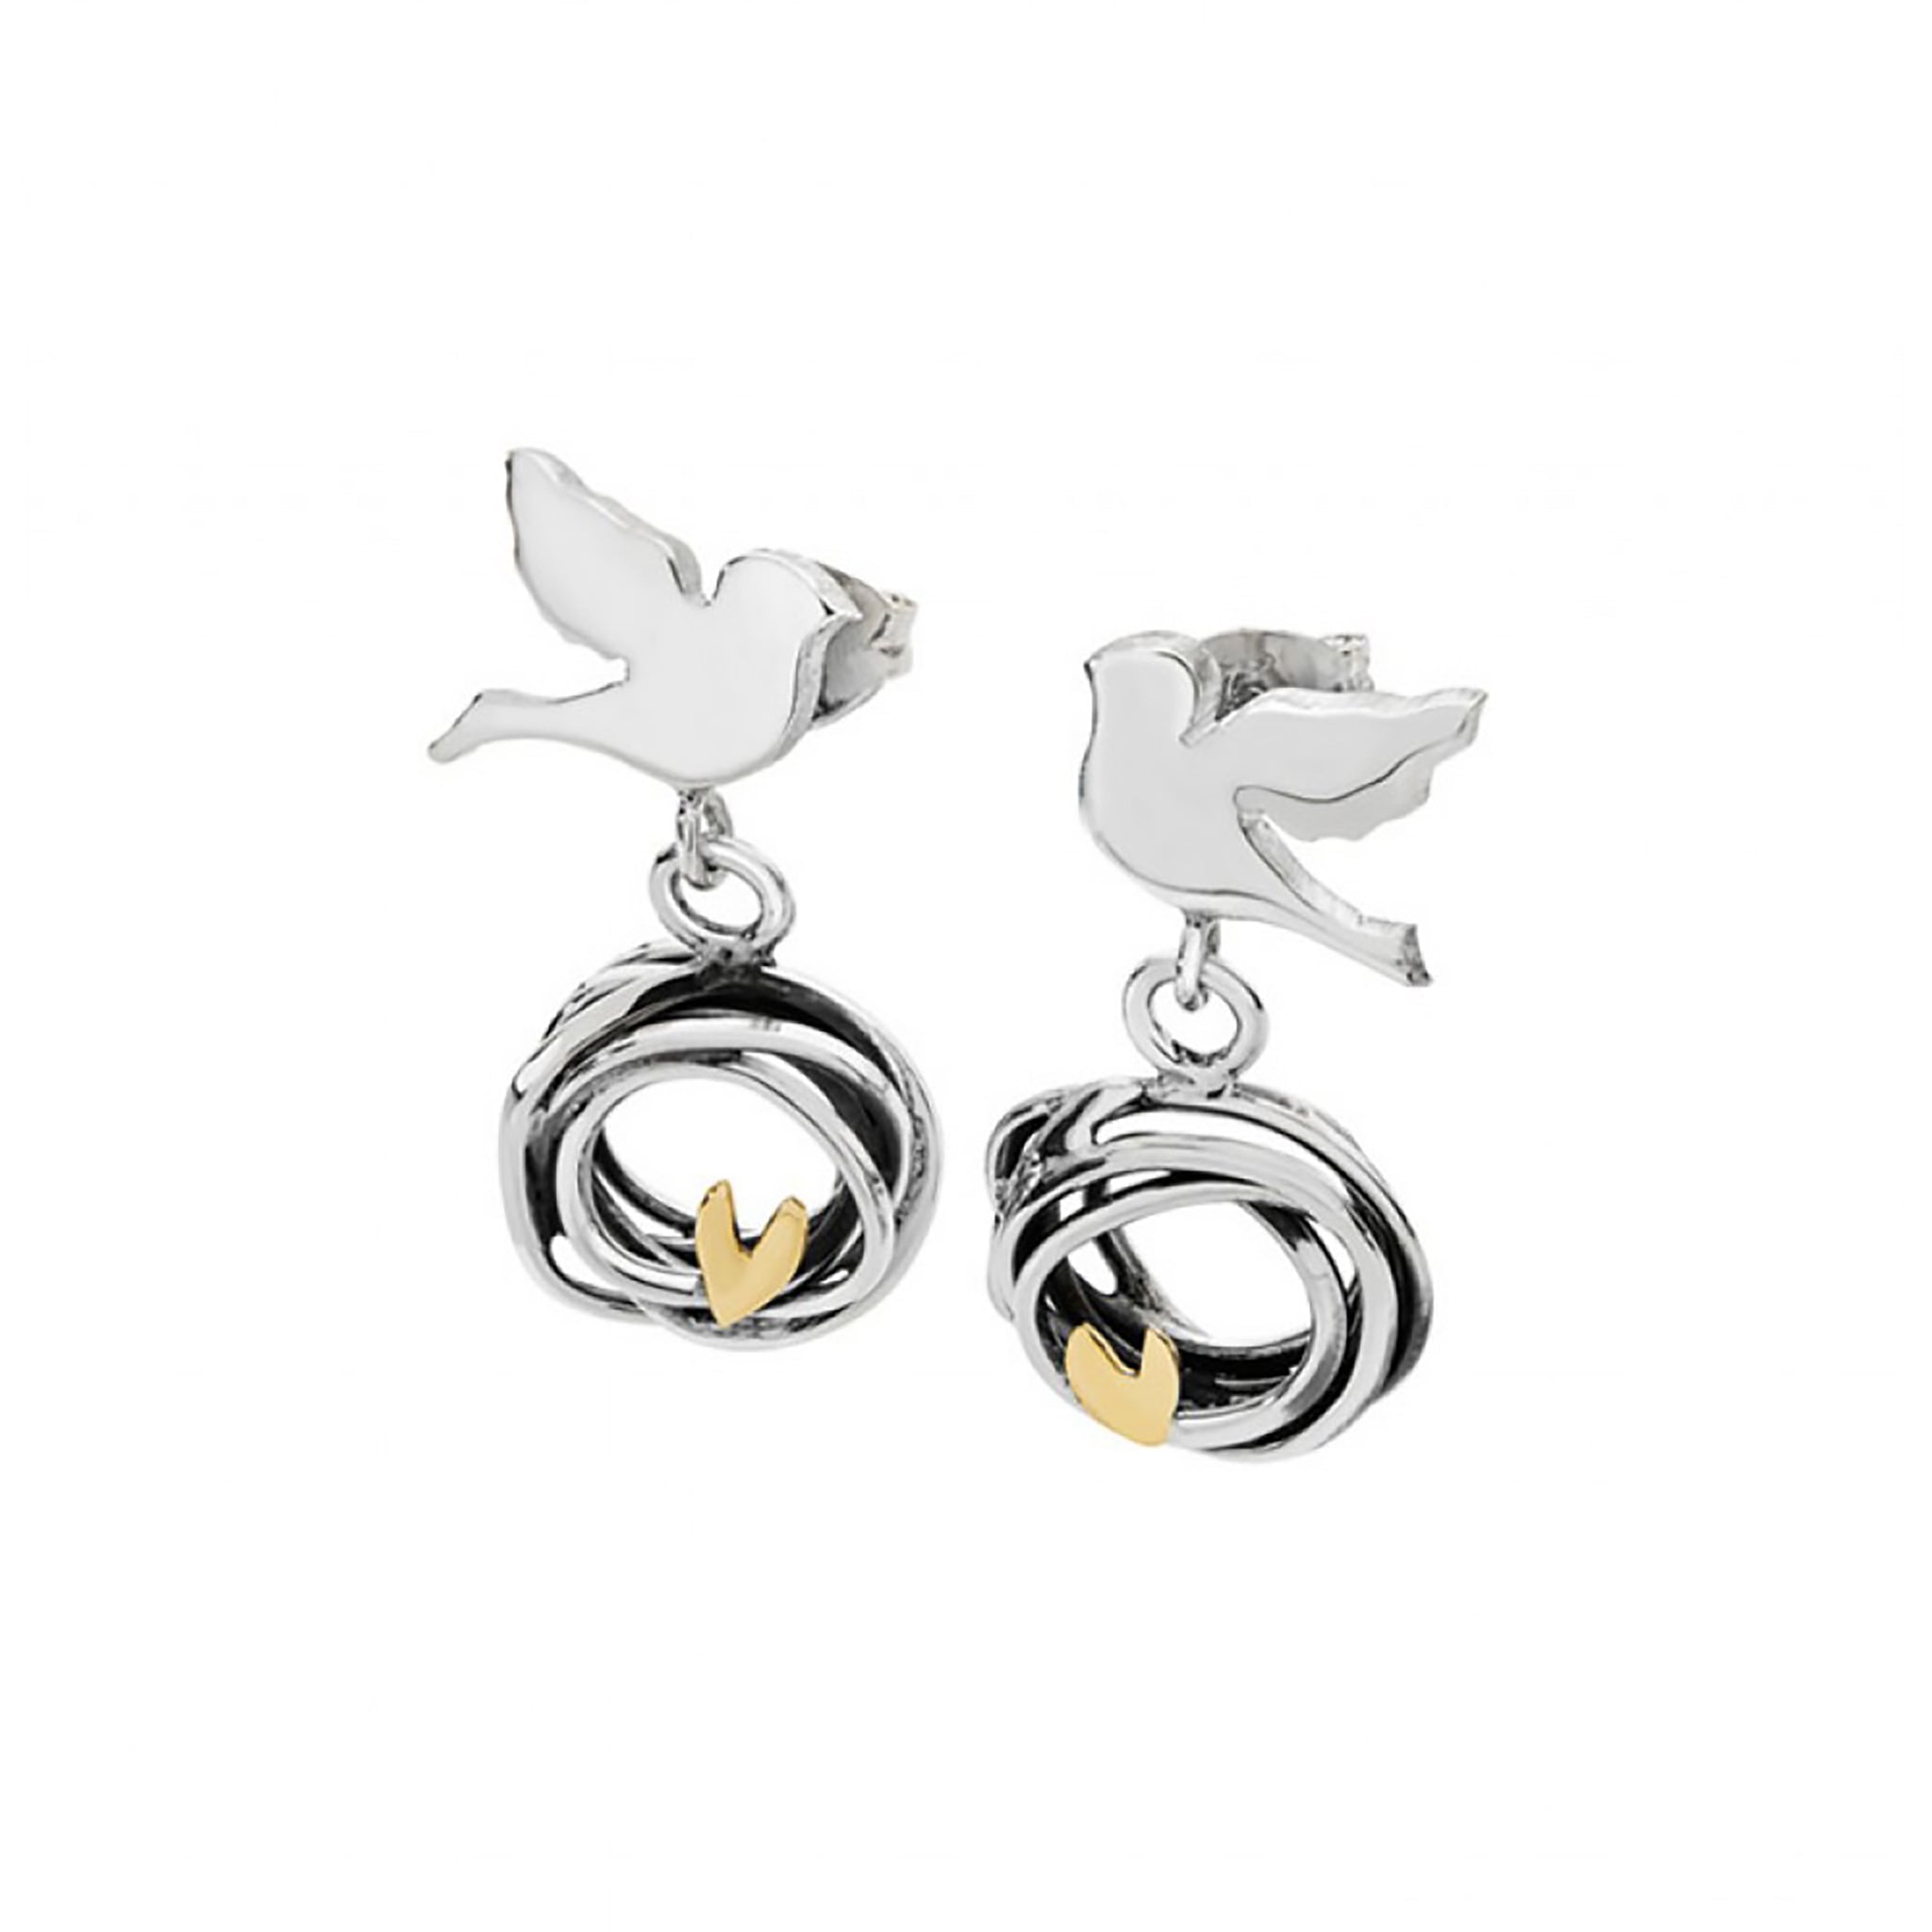 Silver bird earrings with nest shape drops featuring gold heart detail on stud fittings